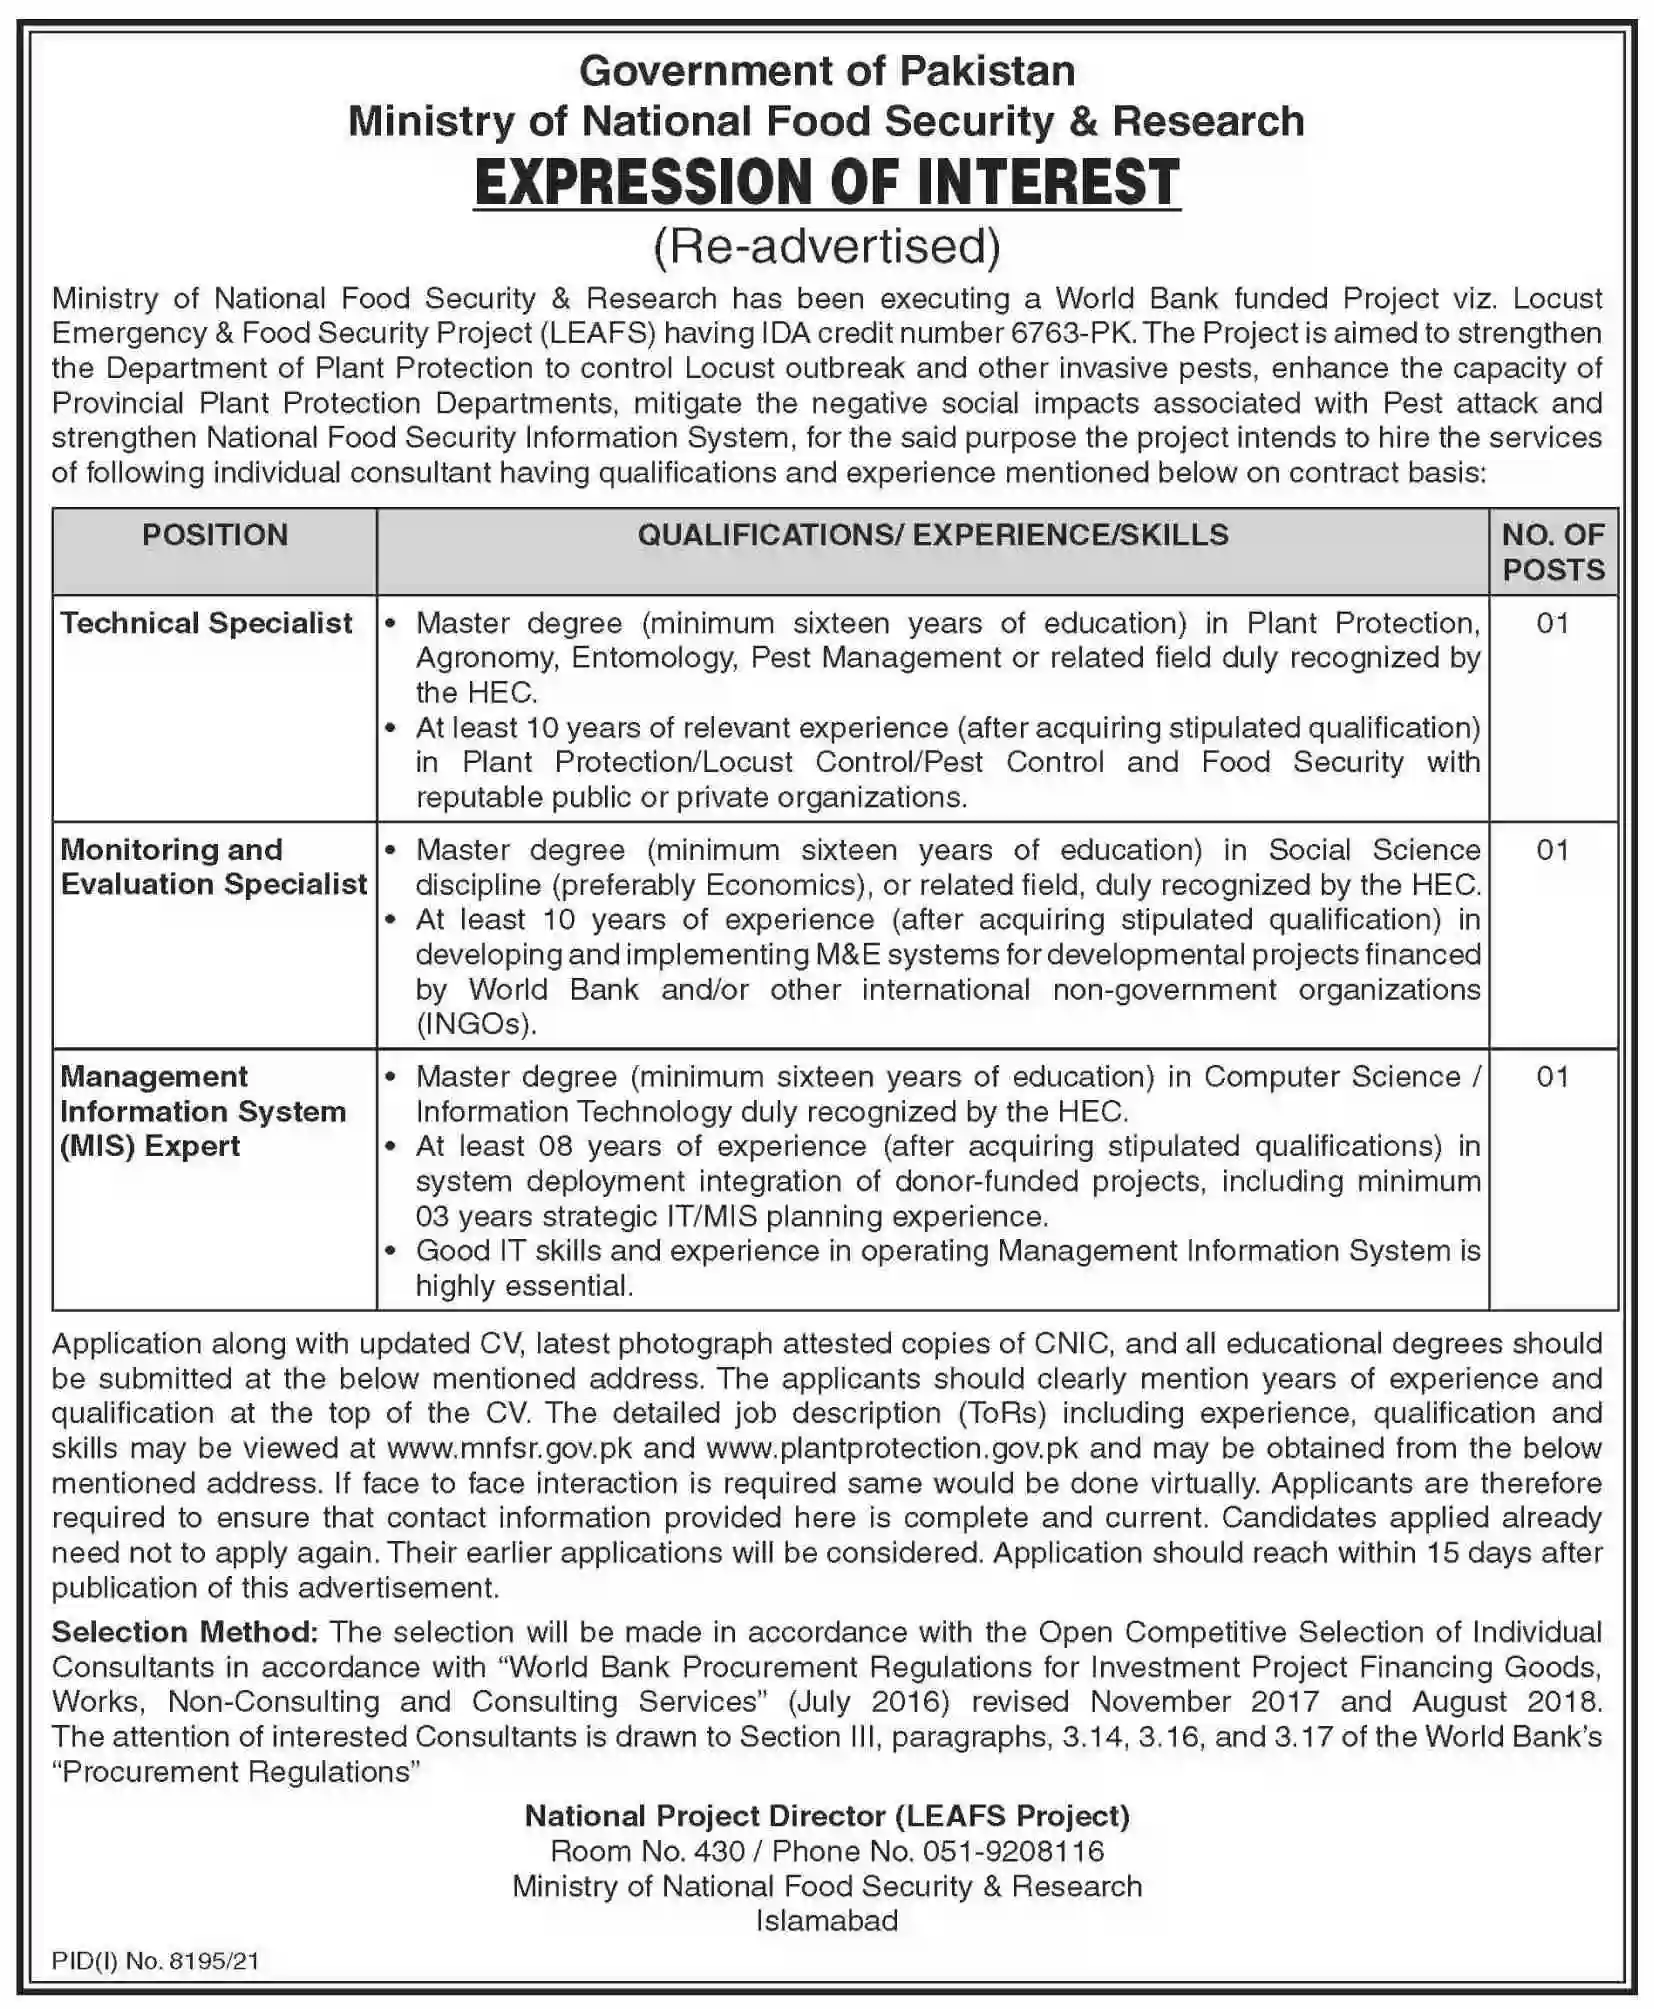 Ministry of National Food Security and Research MNFSR Jobs 2022 Advertisement 1